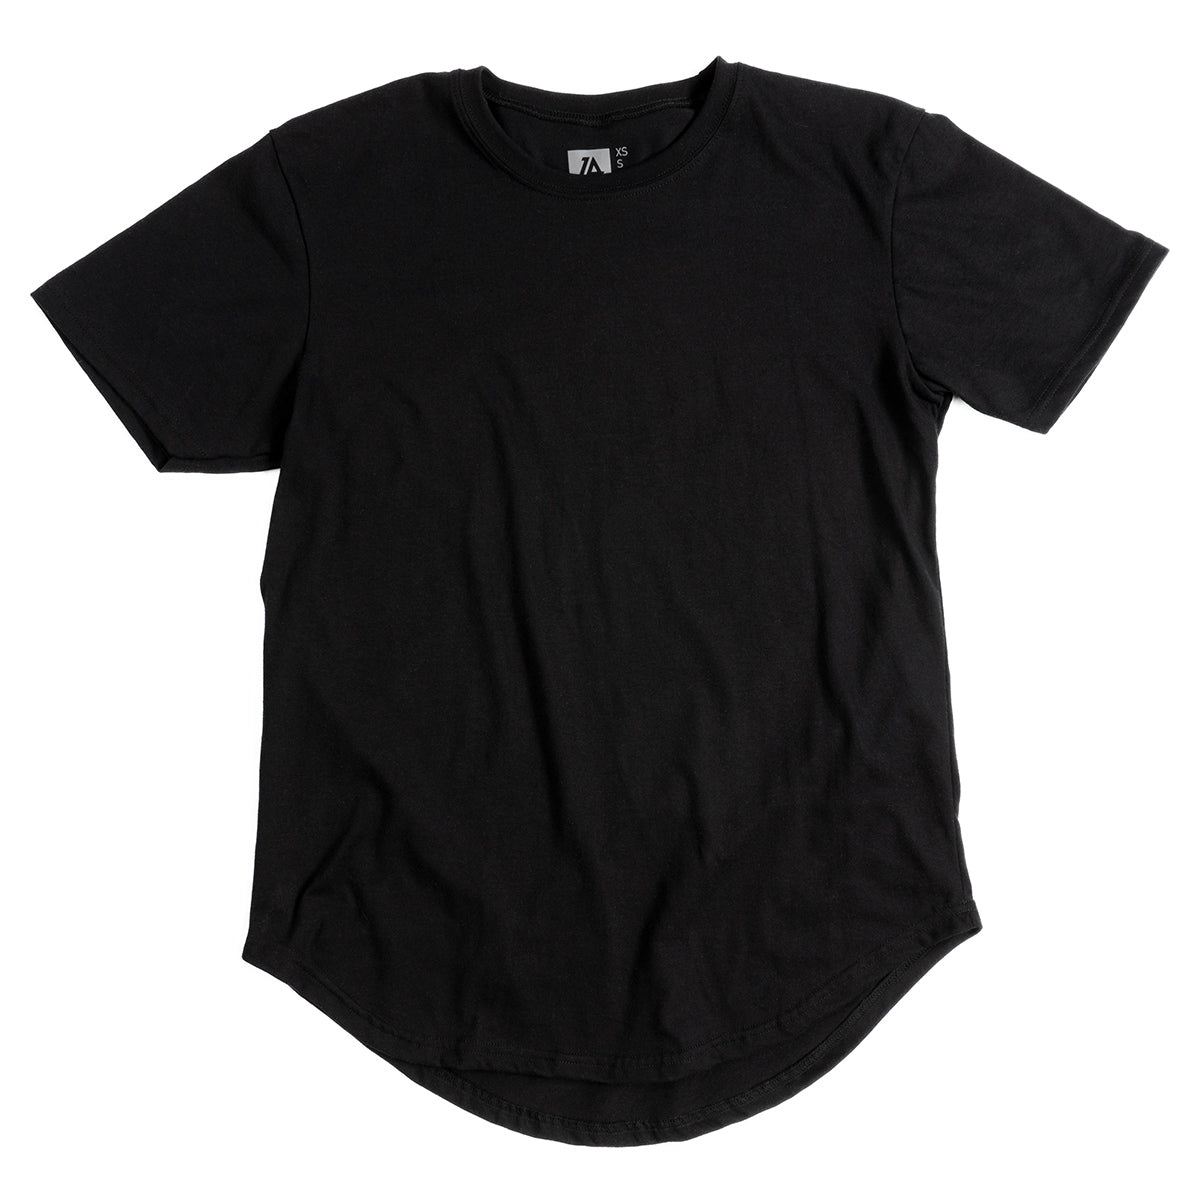 Lost Art Canada - black tagless basic tee front view